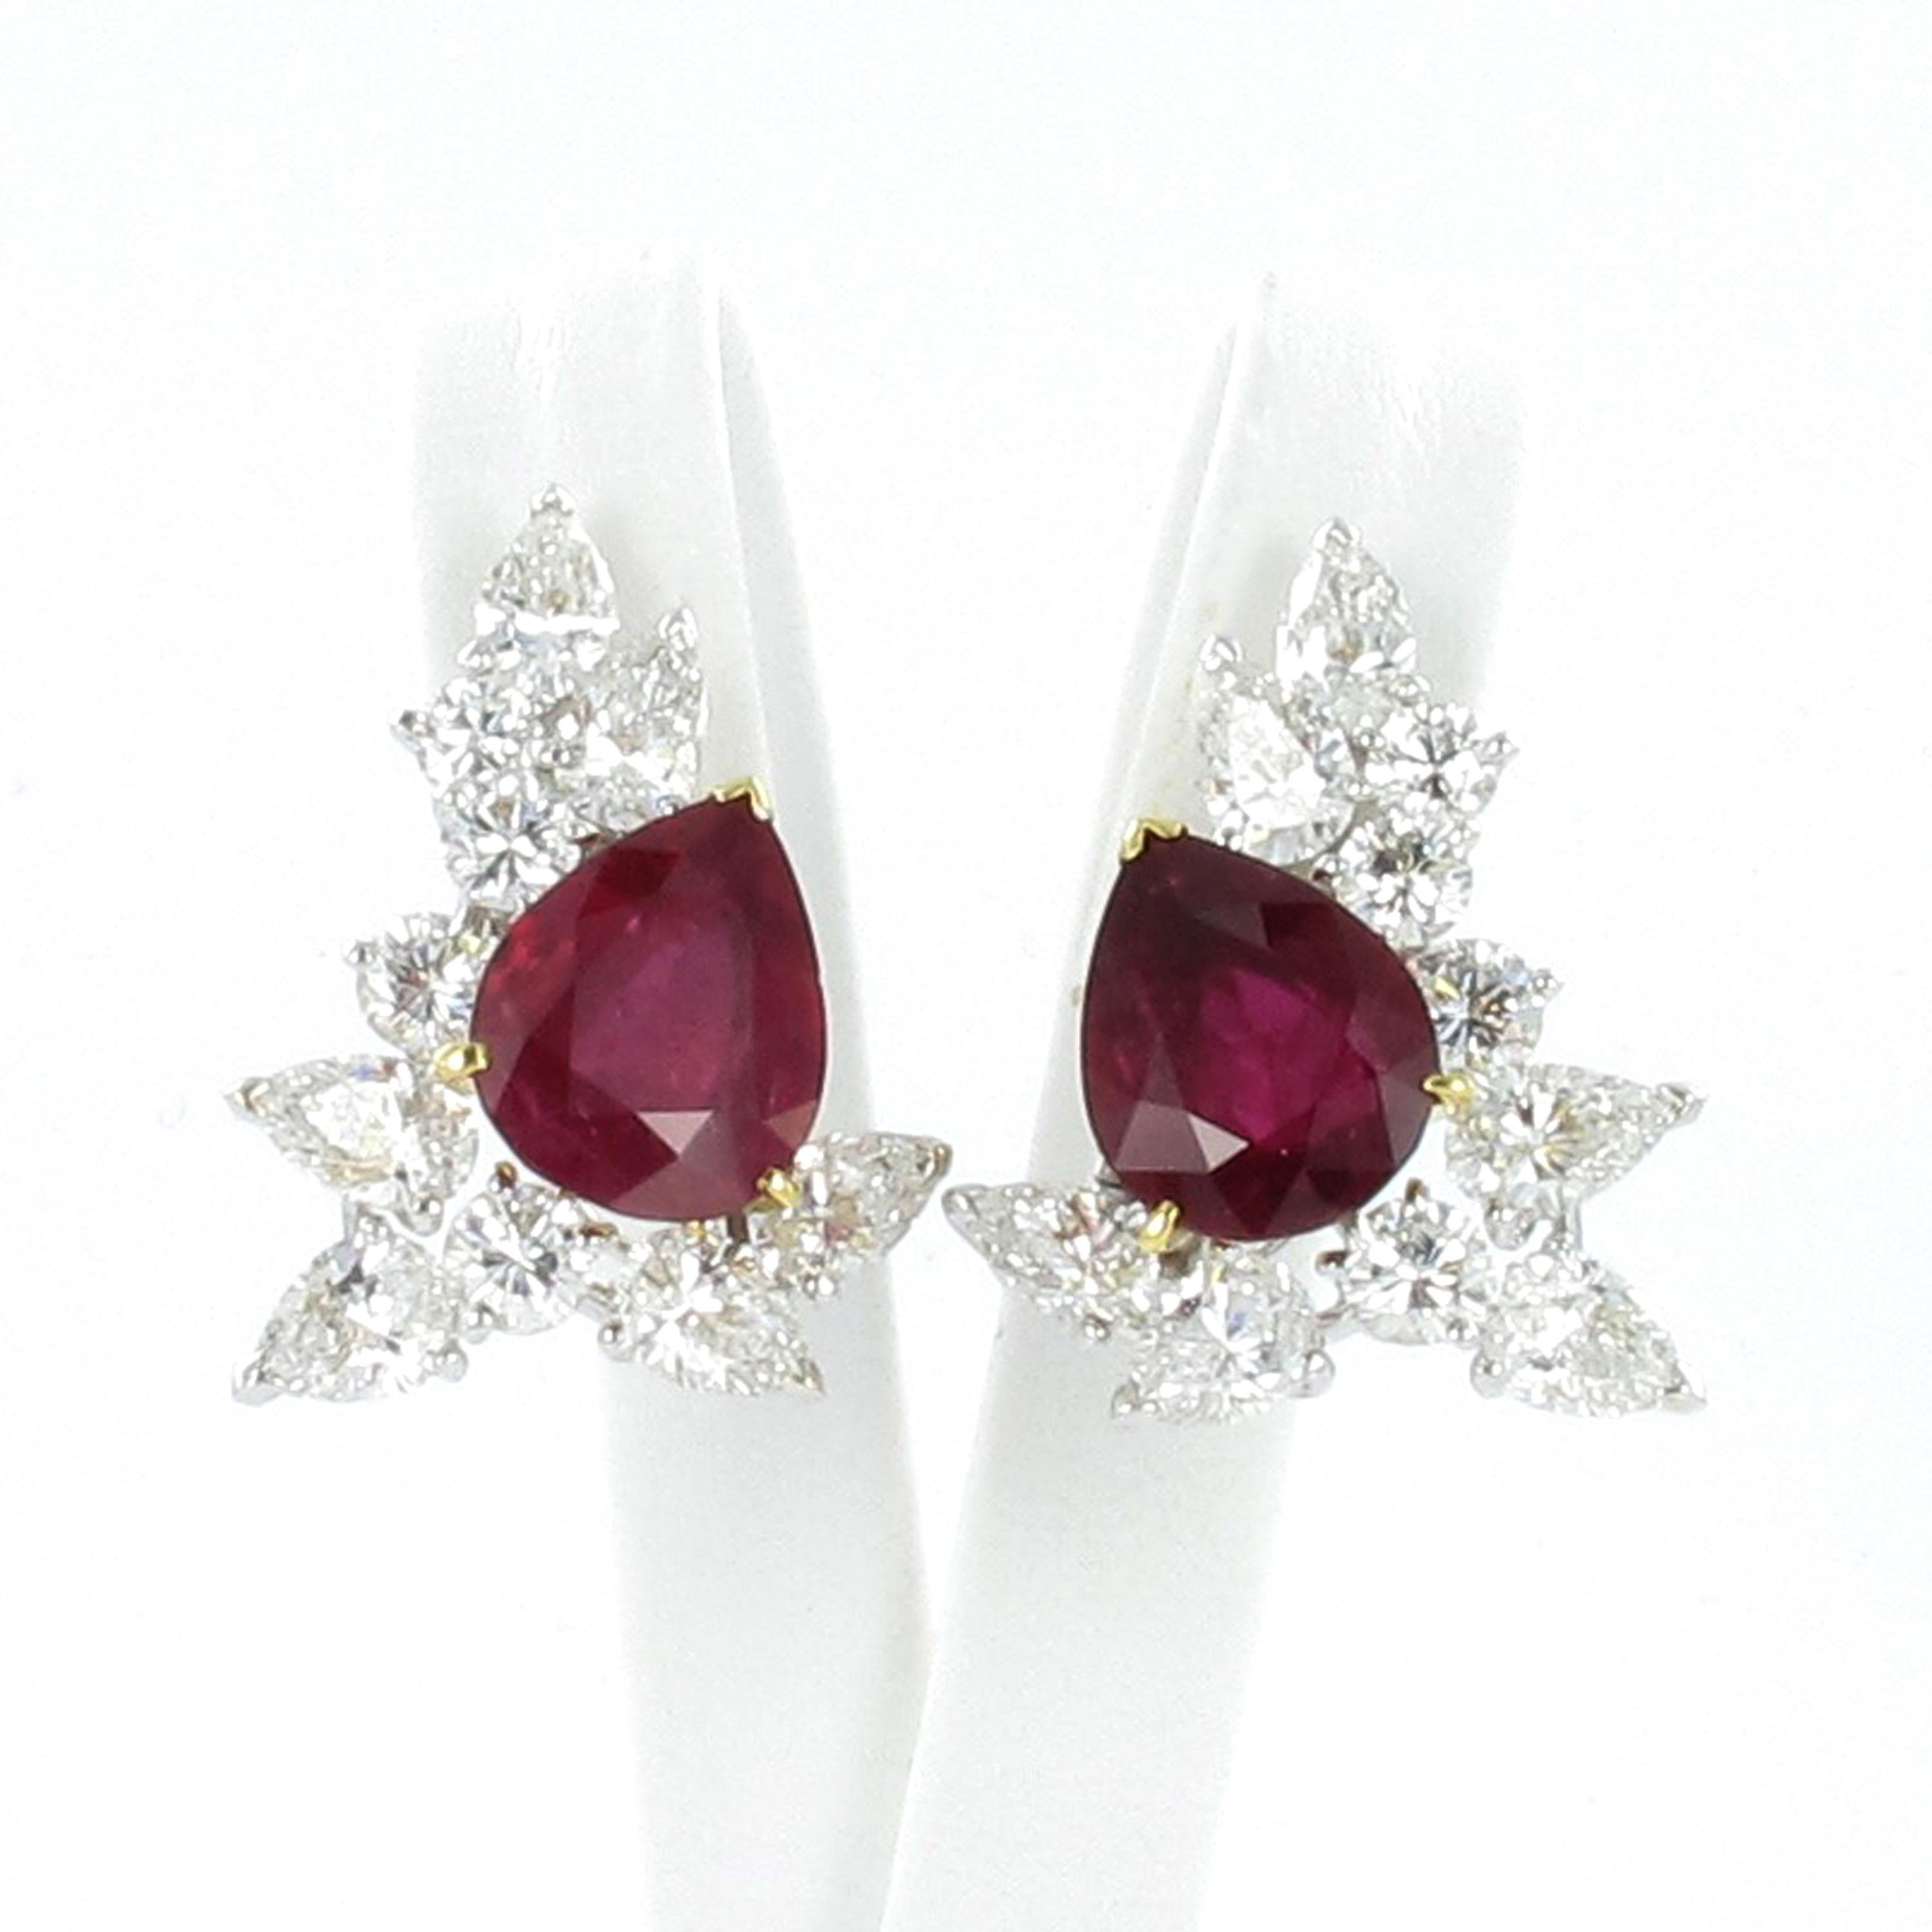 Magnificent pair of ruby and diamond ear clips by Paris based French Jeweller FRED.

Each set with a very fine pear-shaped ruby weighing 3.79 and 4.25 carats respectively. The rubies are accompanied by Gubelin Gem Lab Report quoting Thai origin with